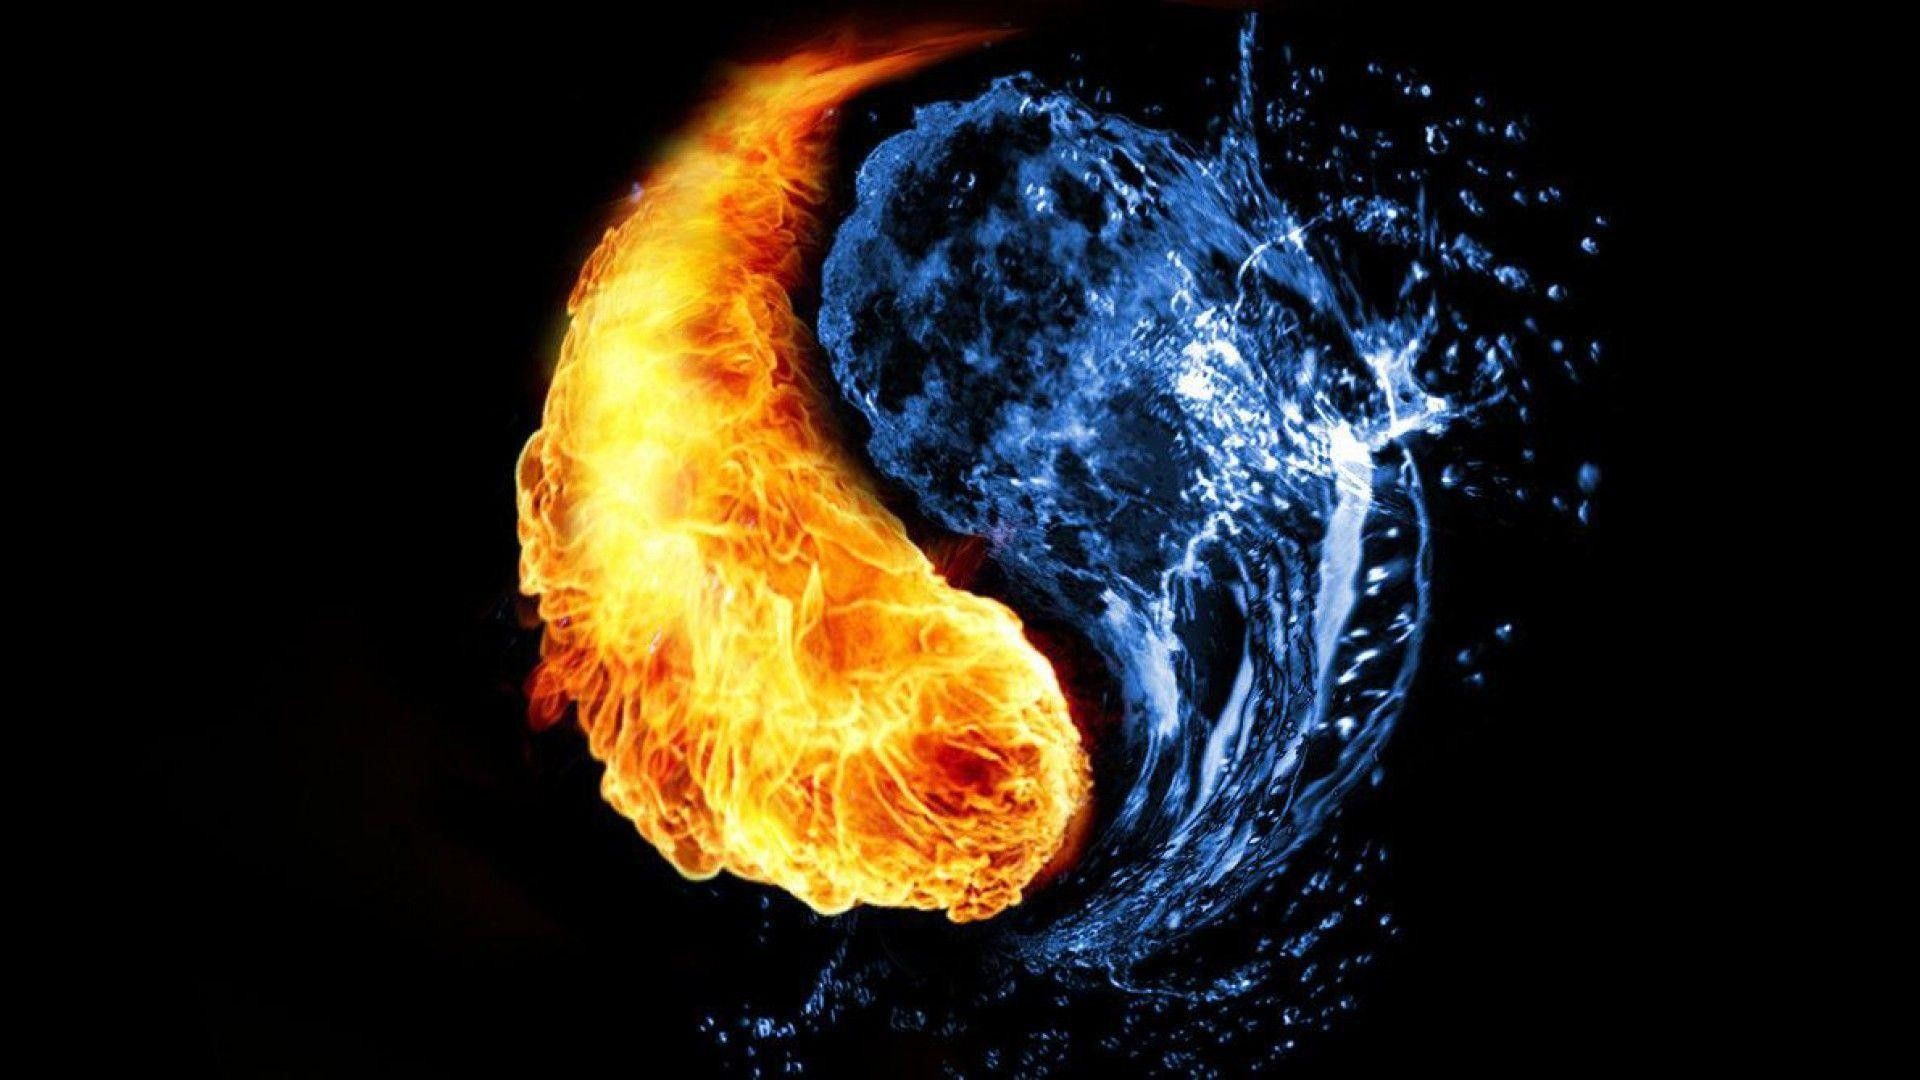 1920x Cool Fire And Water Background Wallpaper And Water Background